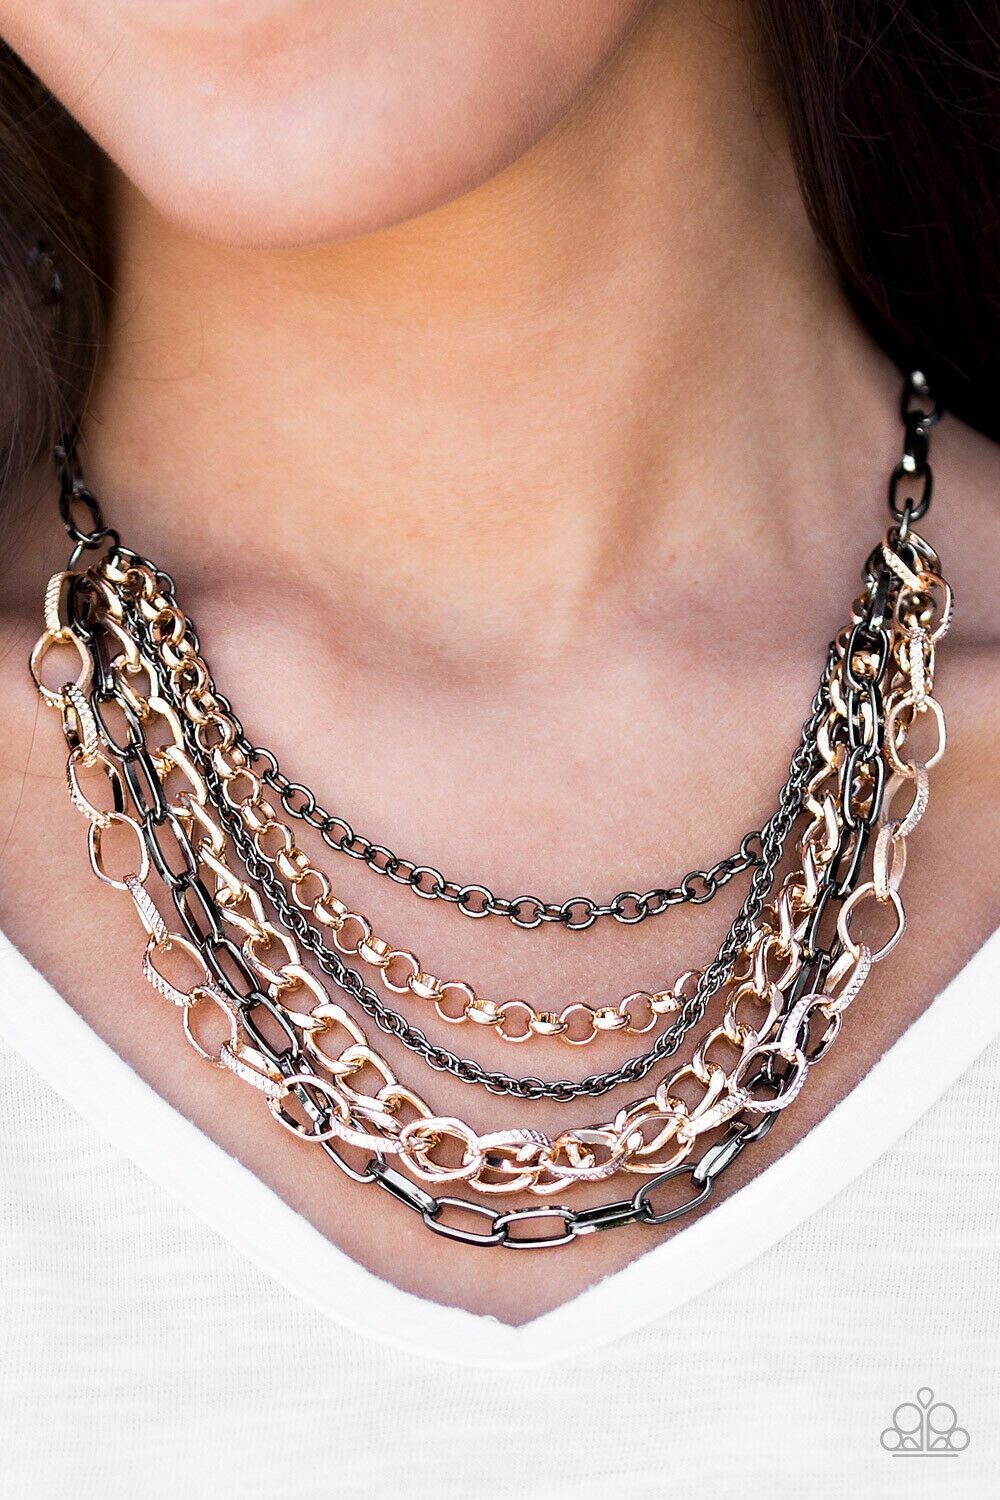 Word On The Street Gunmetal and Gold Necklace - Paparazzi Accessories-CarasShop.com - $5 Jewelry by Cara Jewels